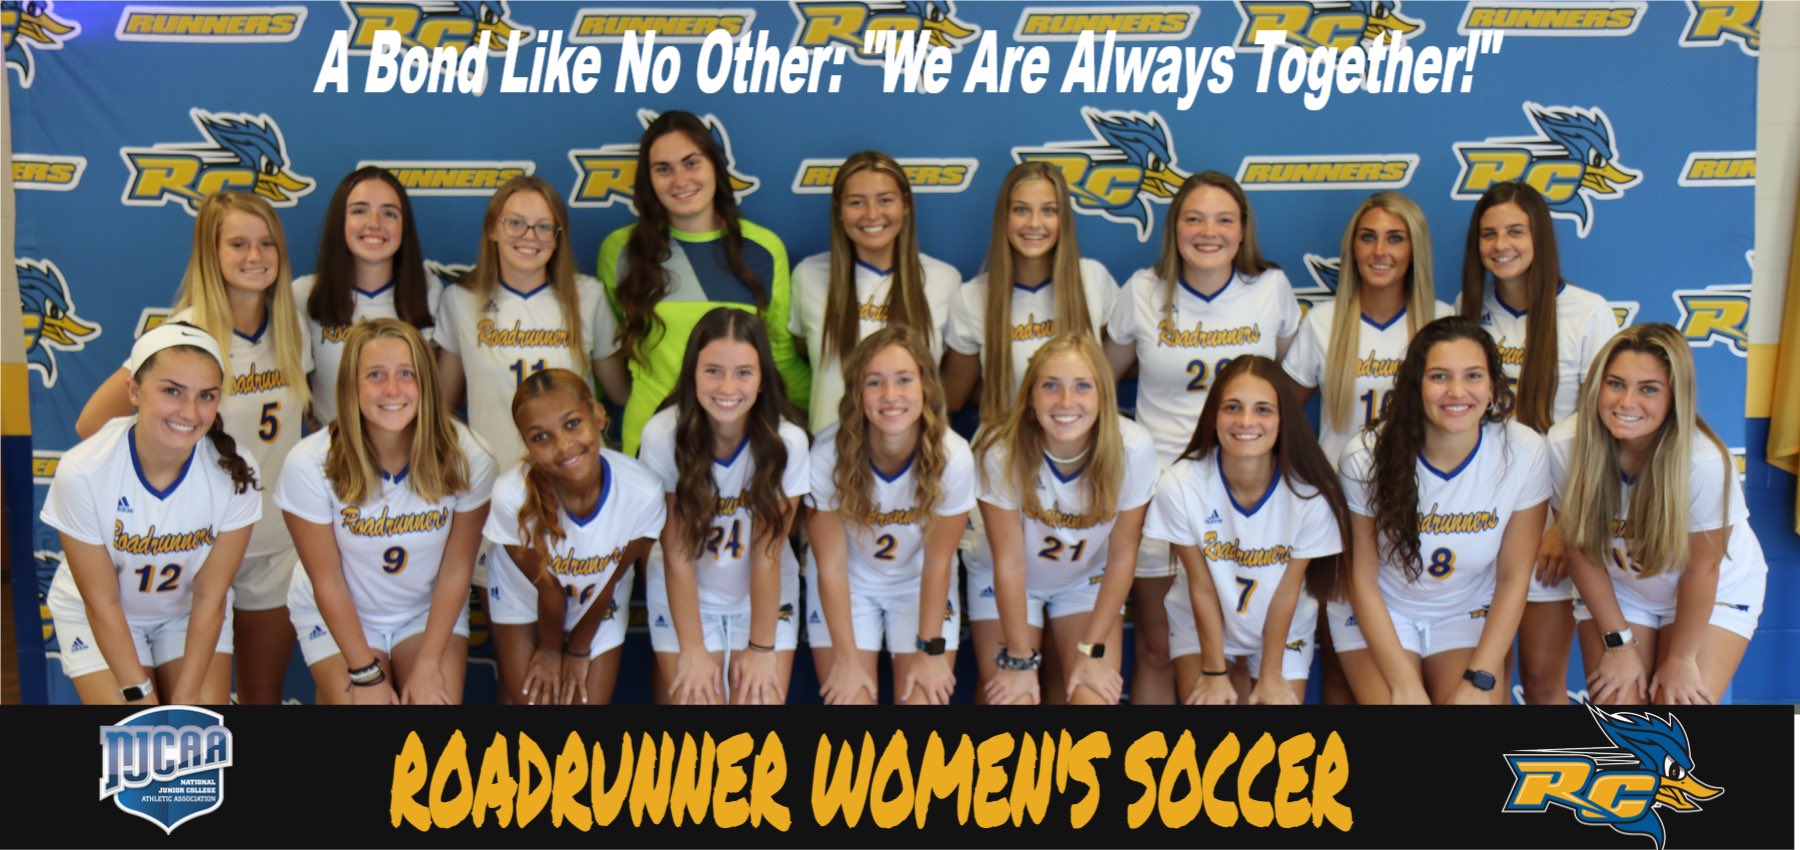 RCSJ-Gloucester Women's Soccer Fights Through Adversity to Emerge in National Spotlight